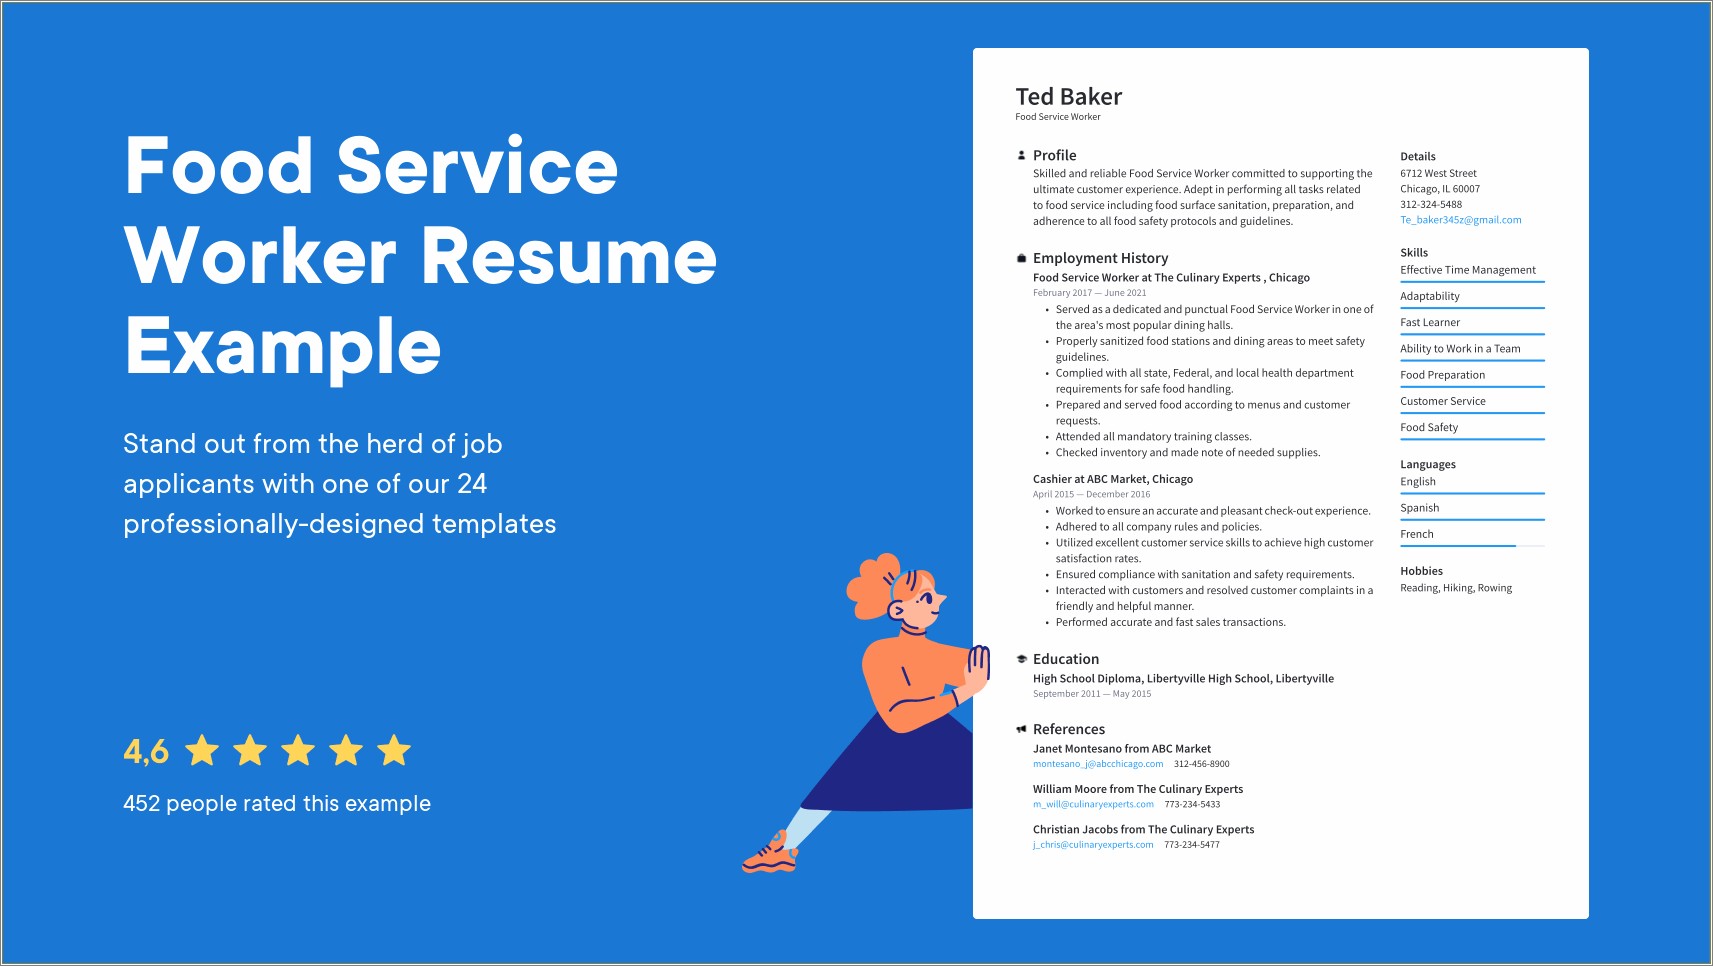 Example Resume Fast Food Service Worker